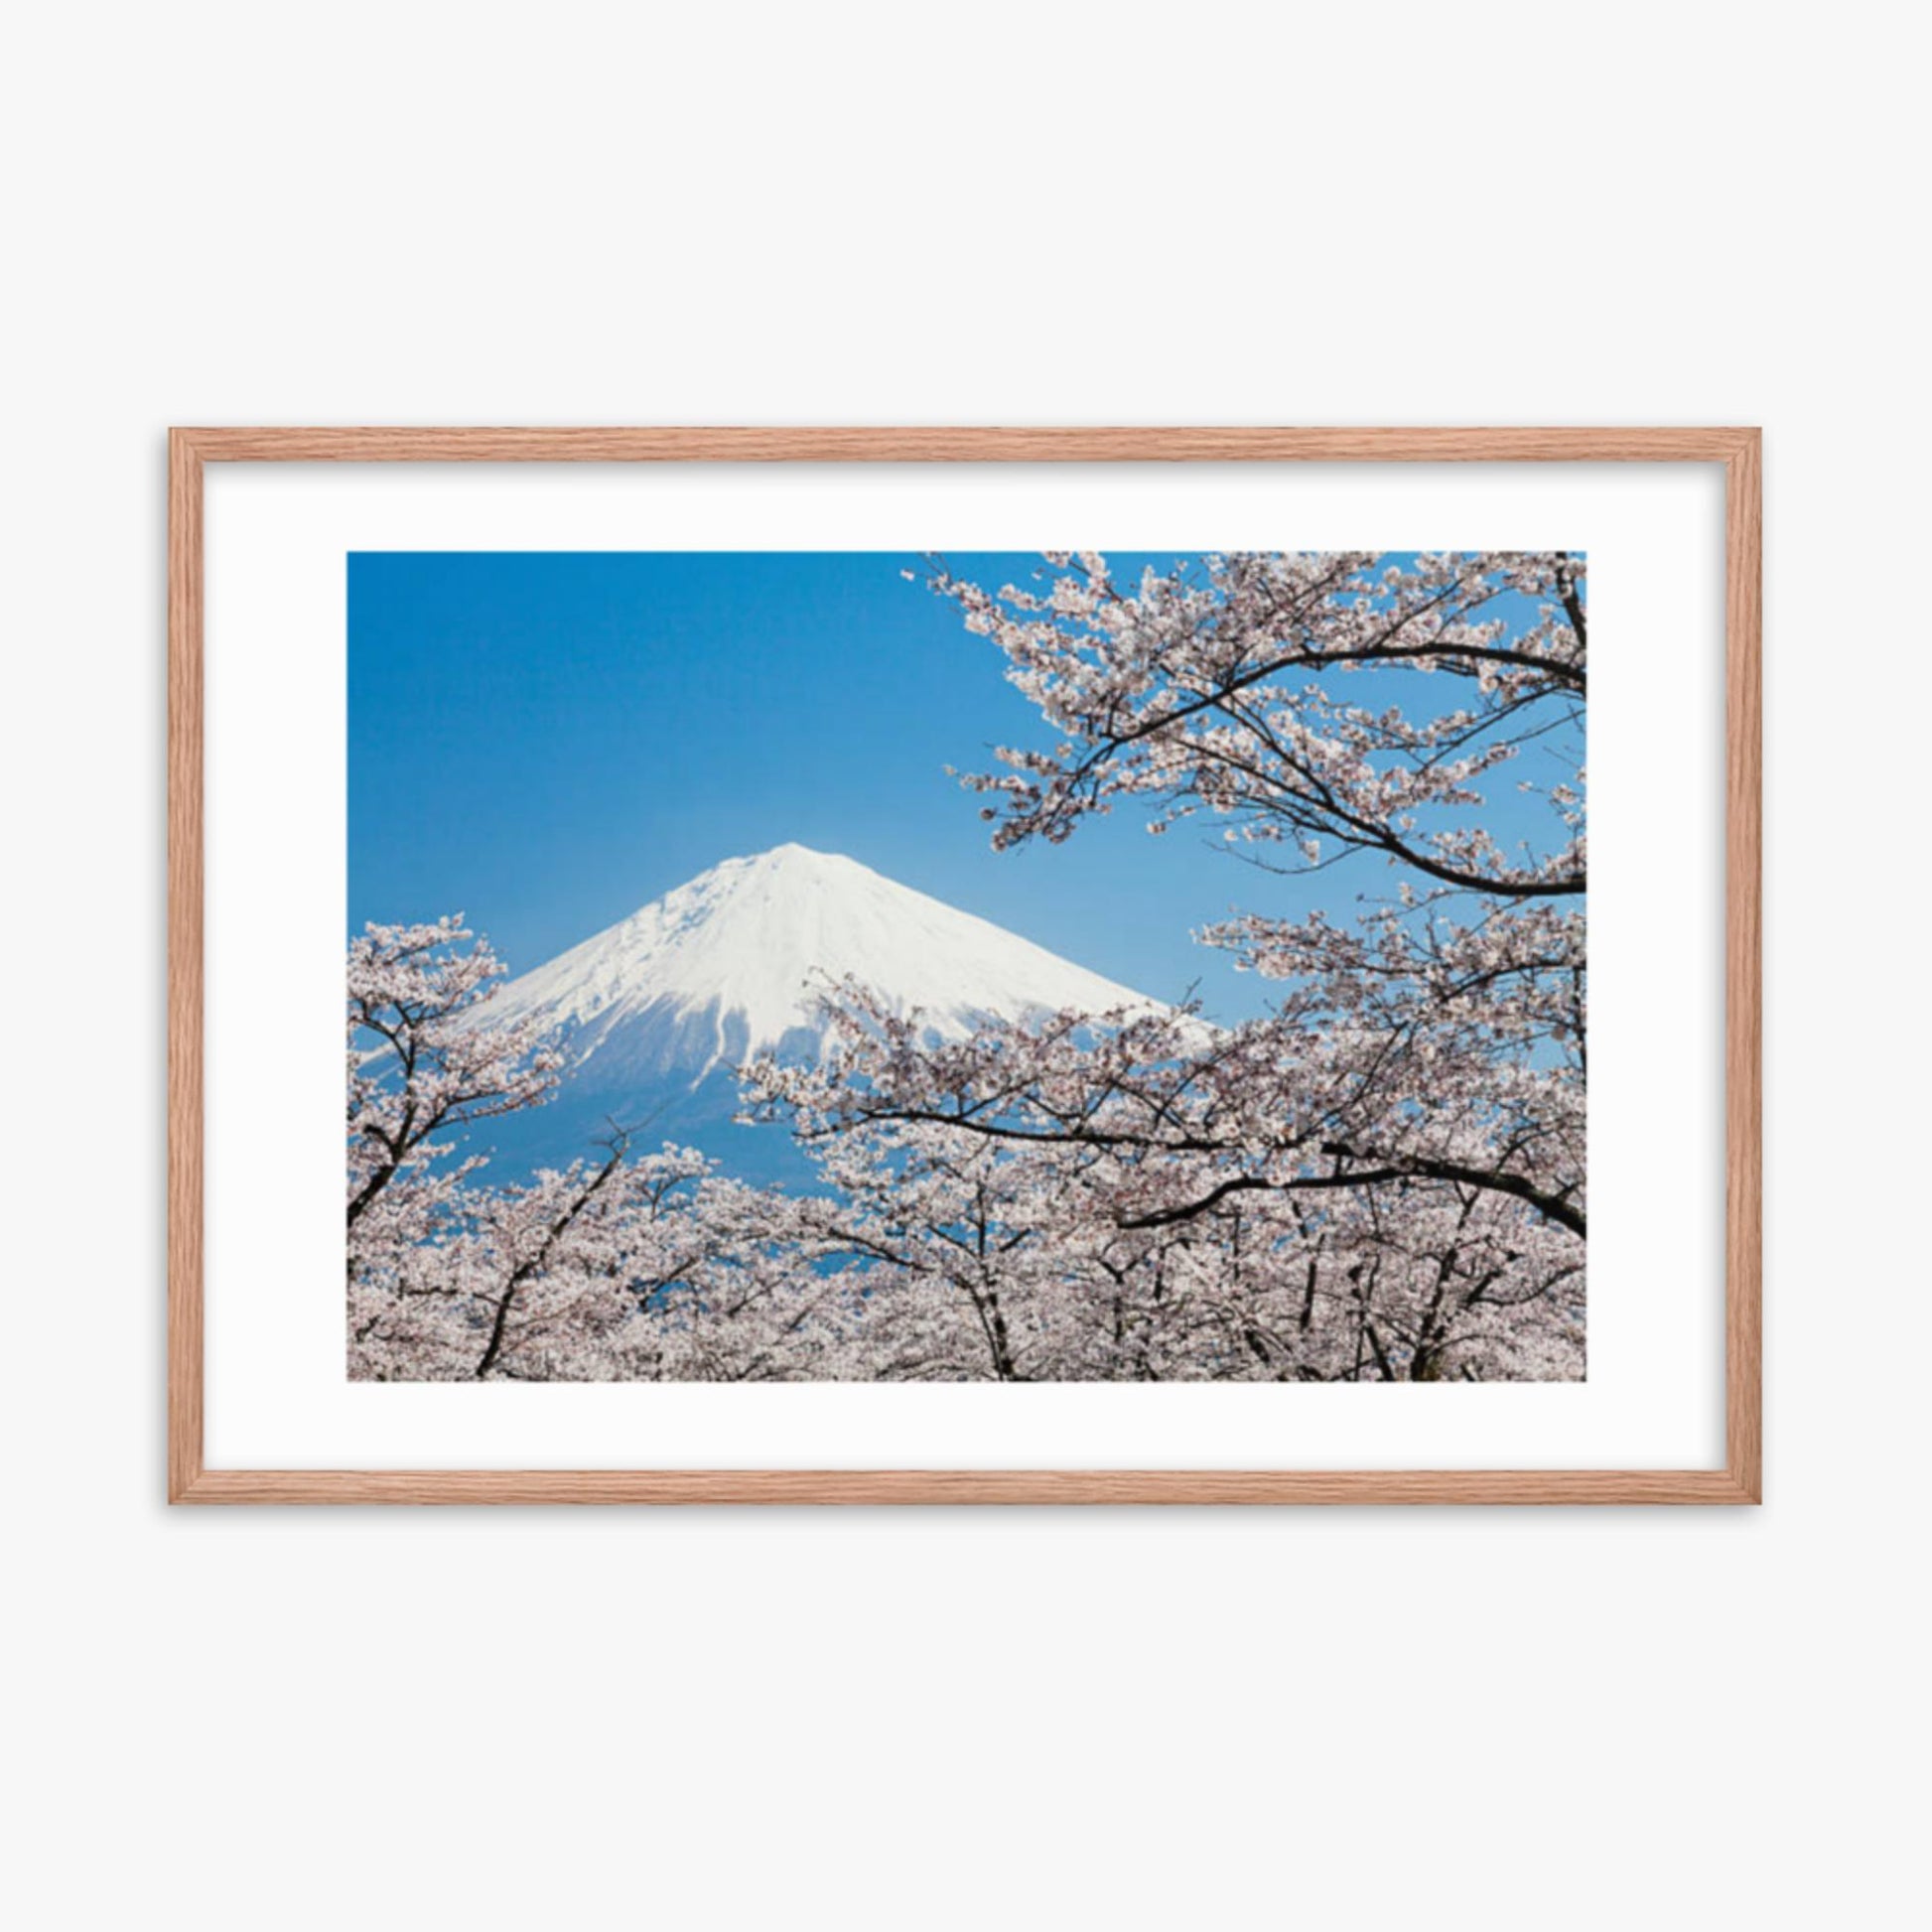 Mount Fuji & Cherry Blossoms 24x36 in Poster With Oak Frame